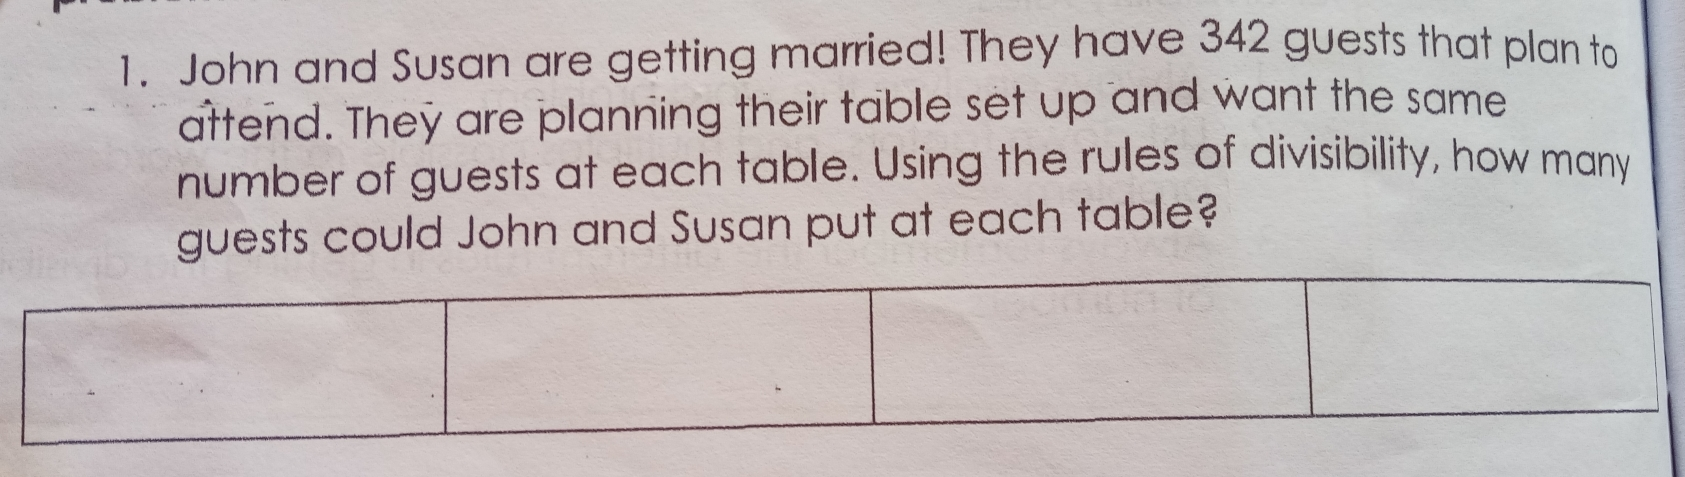 1. John and Susan are getting married! They have 342 guests that plan to attend. They are planning their table set up and want the same number of guests at each table. Using the rules of divisibility, how many sts could John and Susan put at each table?